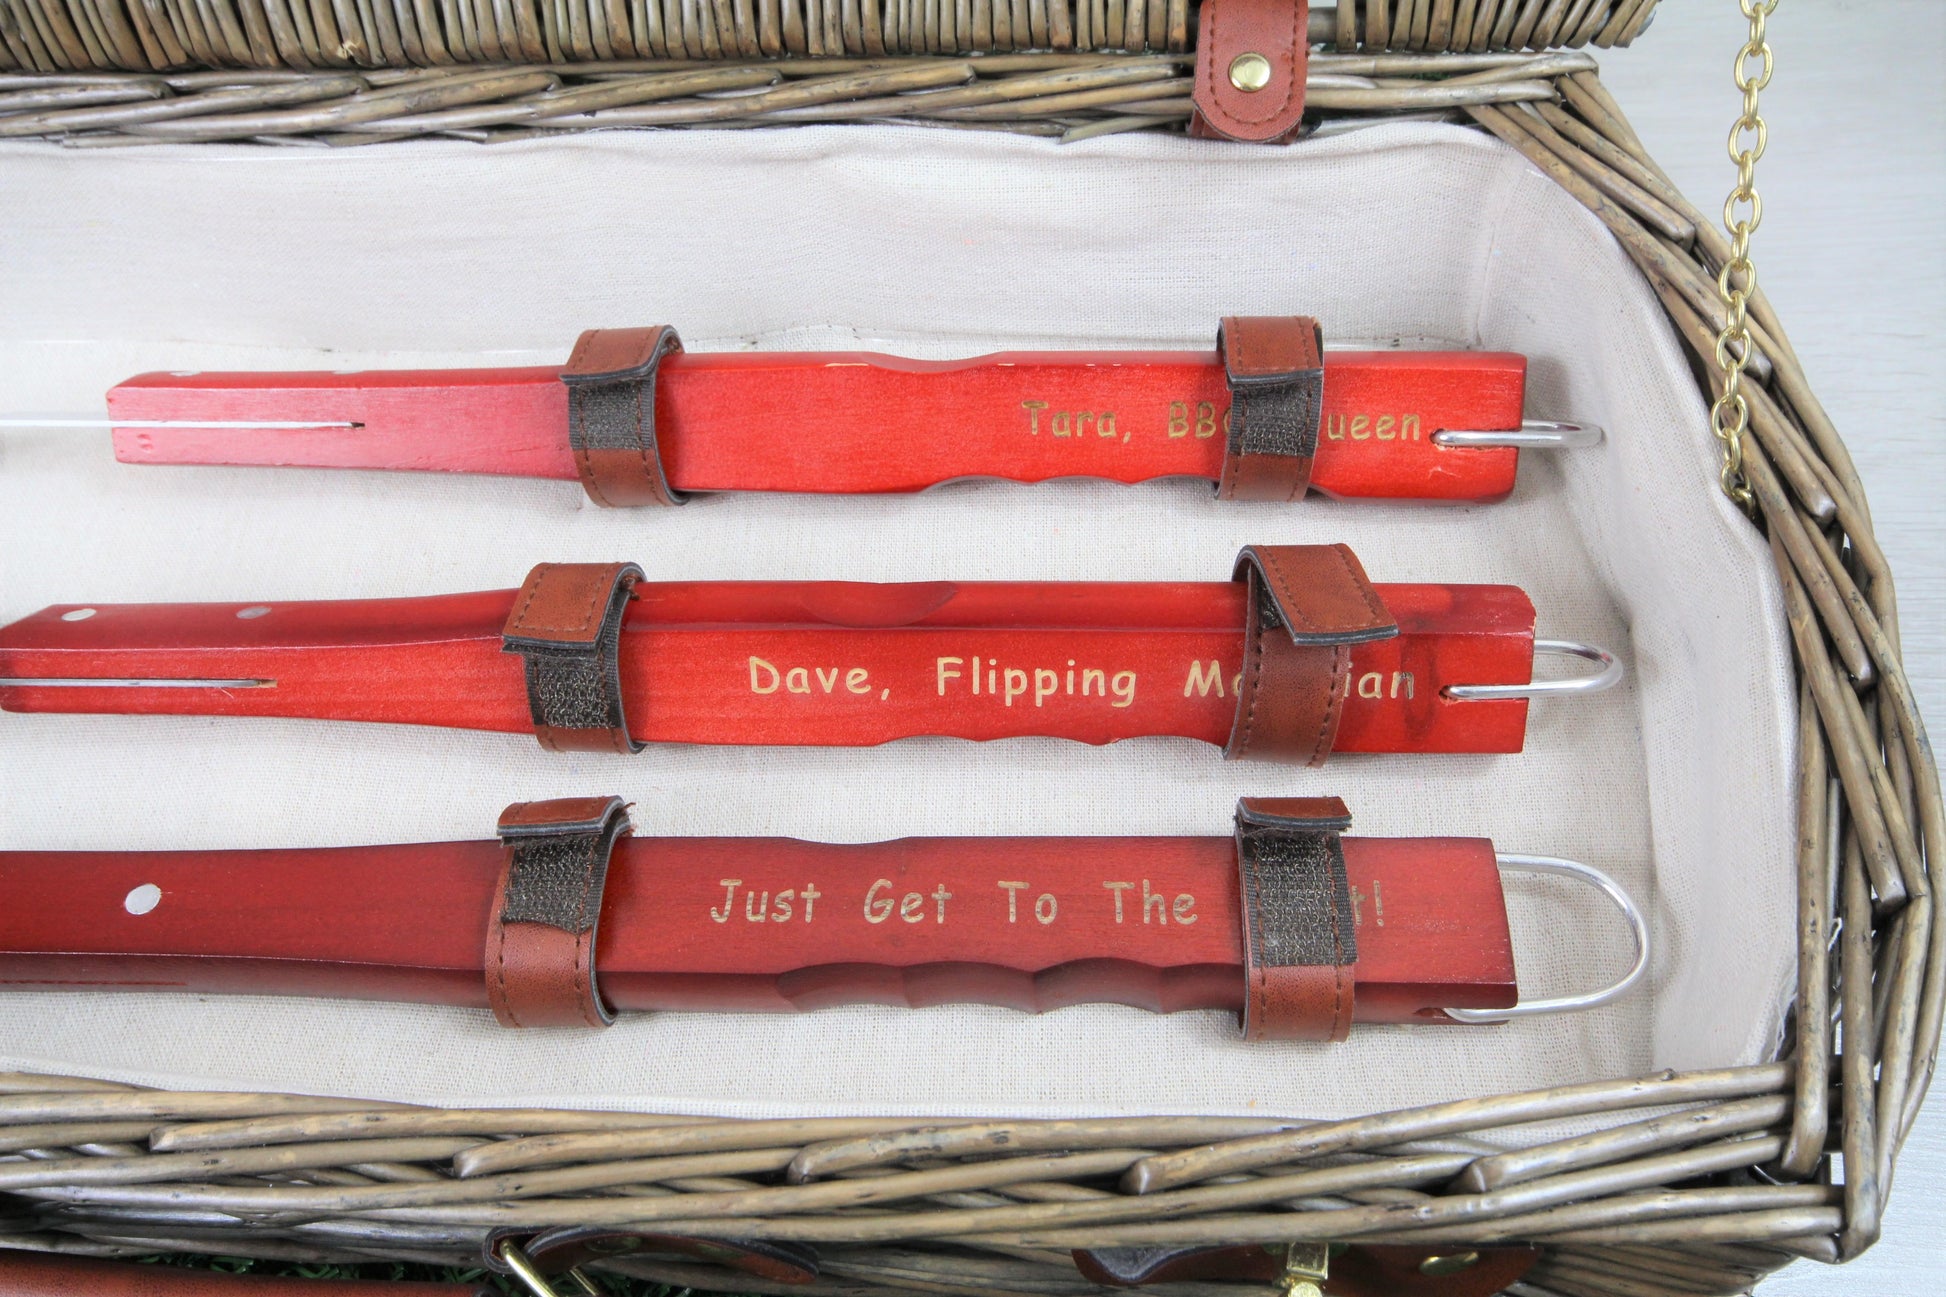 3 Wooden handled personalised barbecue tool that says "Tara, BBQ Queen" "Dave, Flipping Magician" "Just Get To The Point"